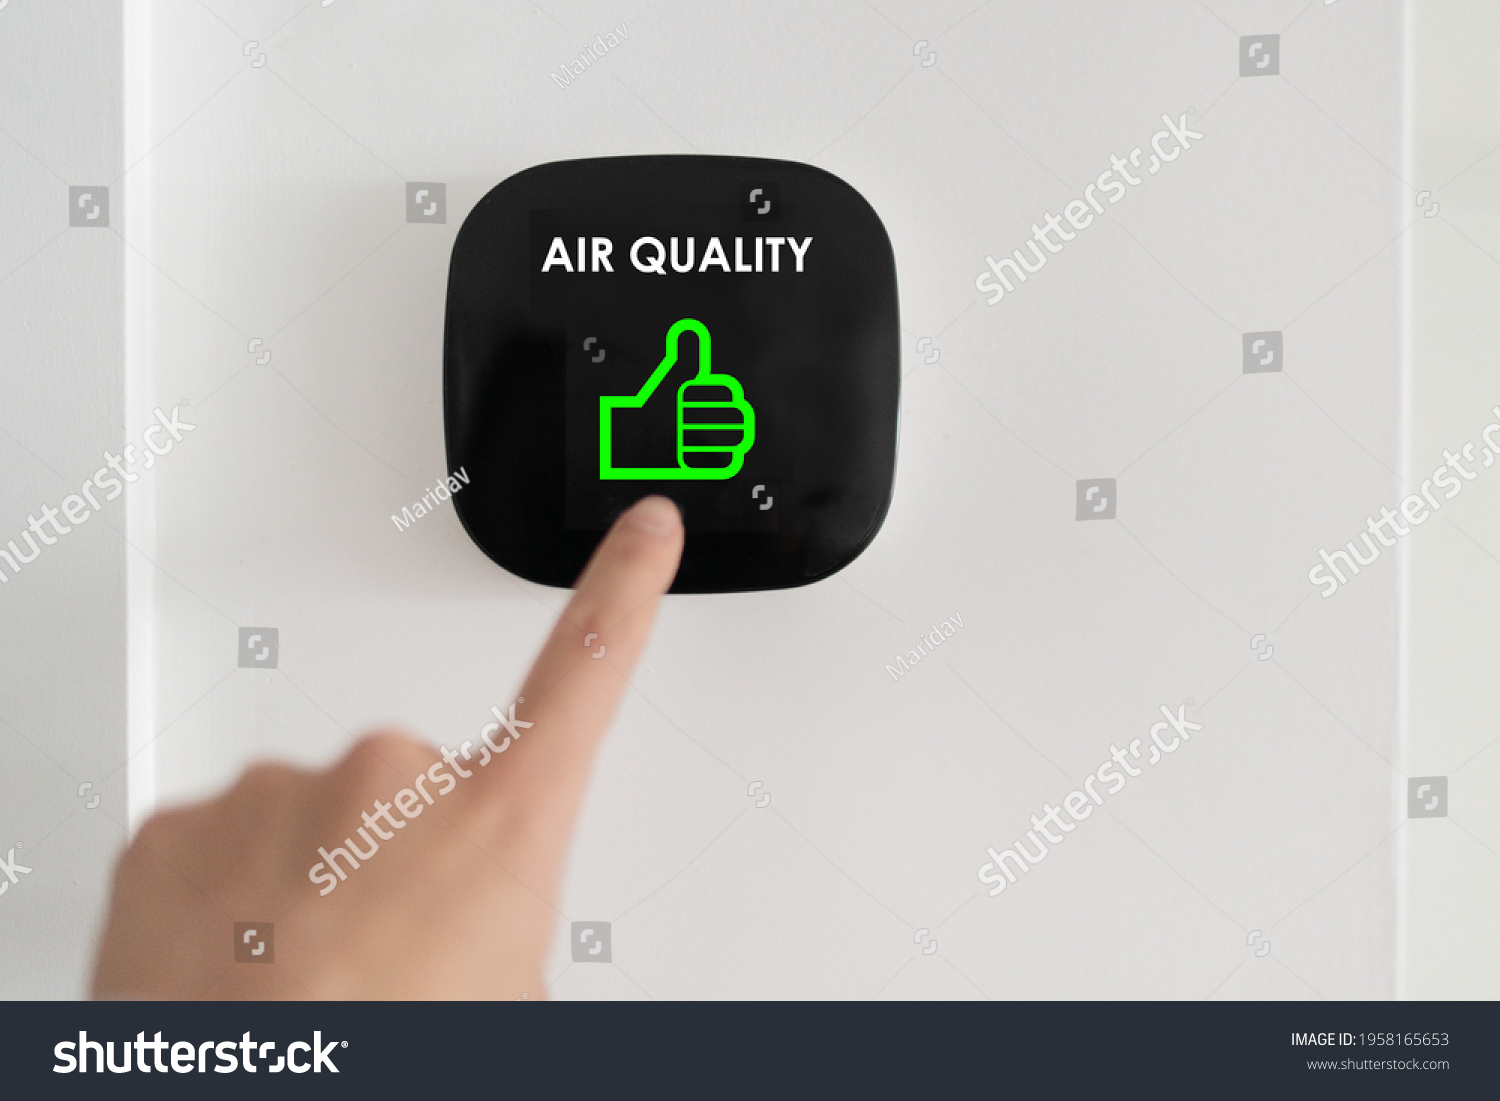 Good air quality indoor smart home domotic touchscreen system. air. Woman touching touchscreen checking air purifier filter at green level with thumbs up graphics. #1958165653